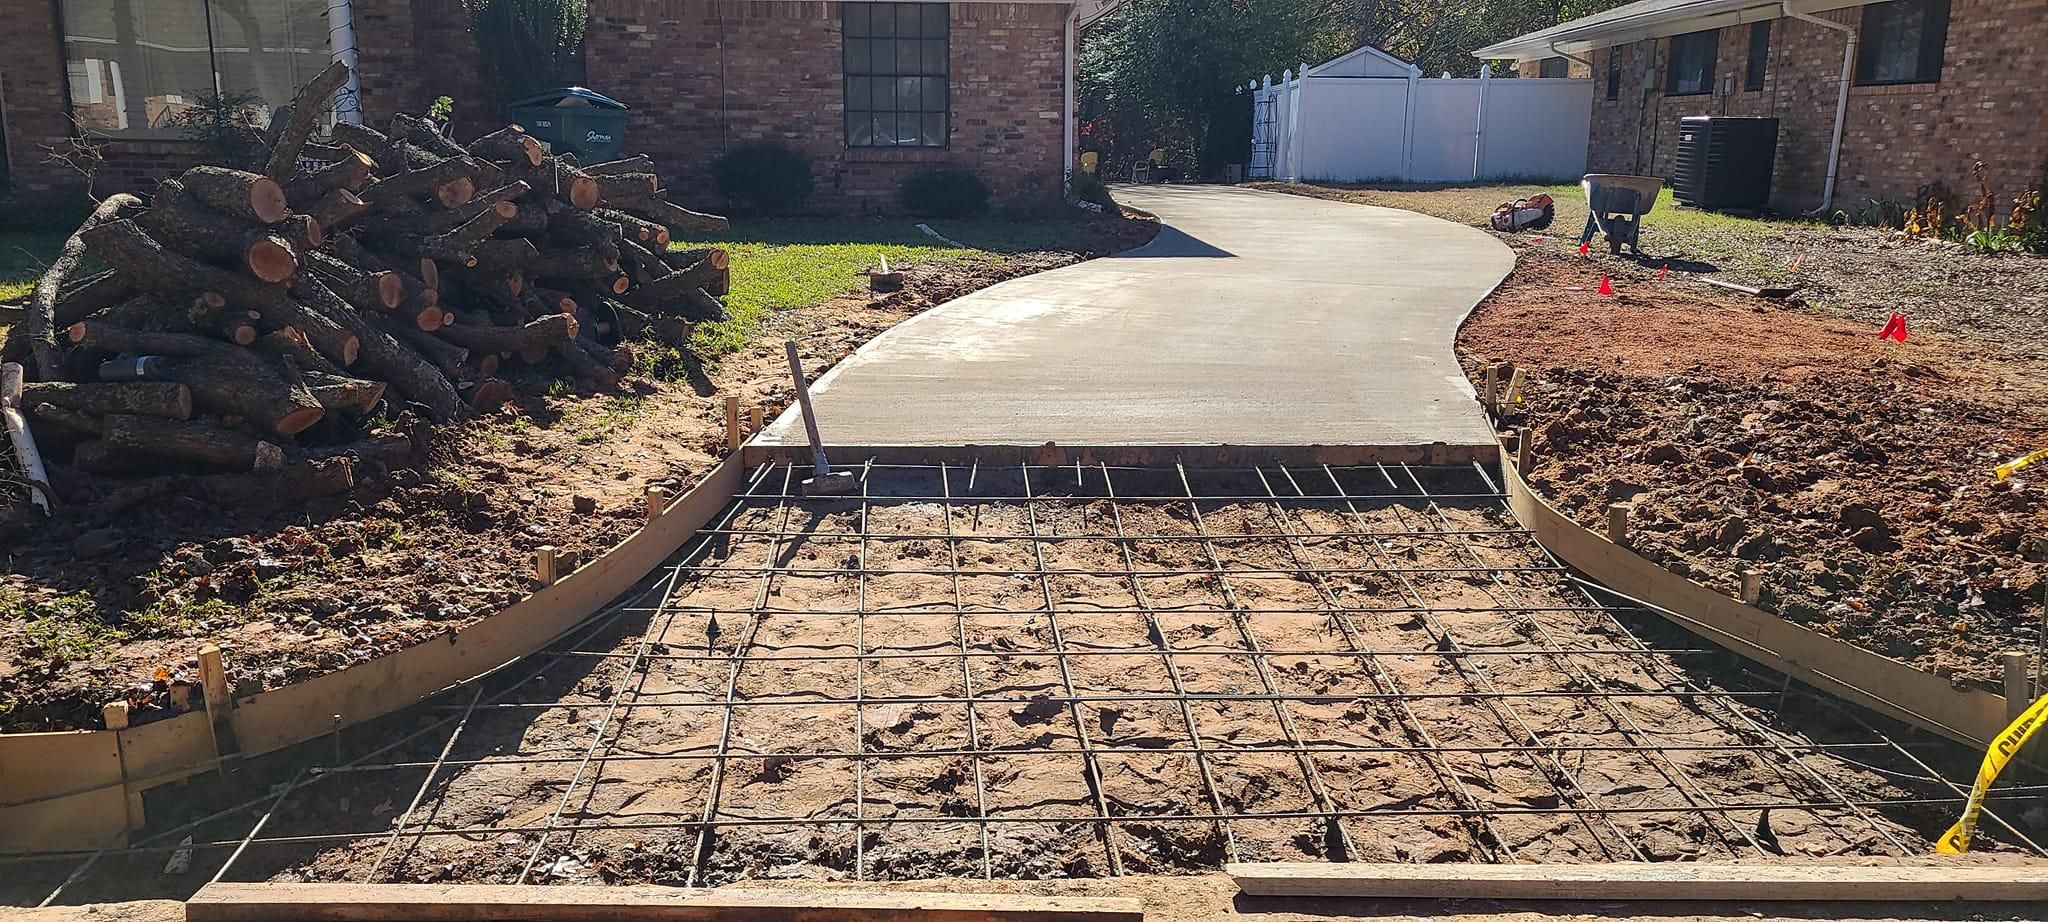  for Concrete Pros  in Sherman, TX